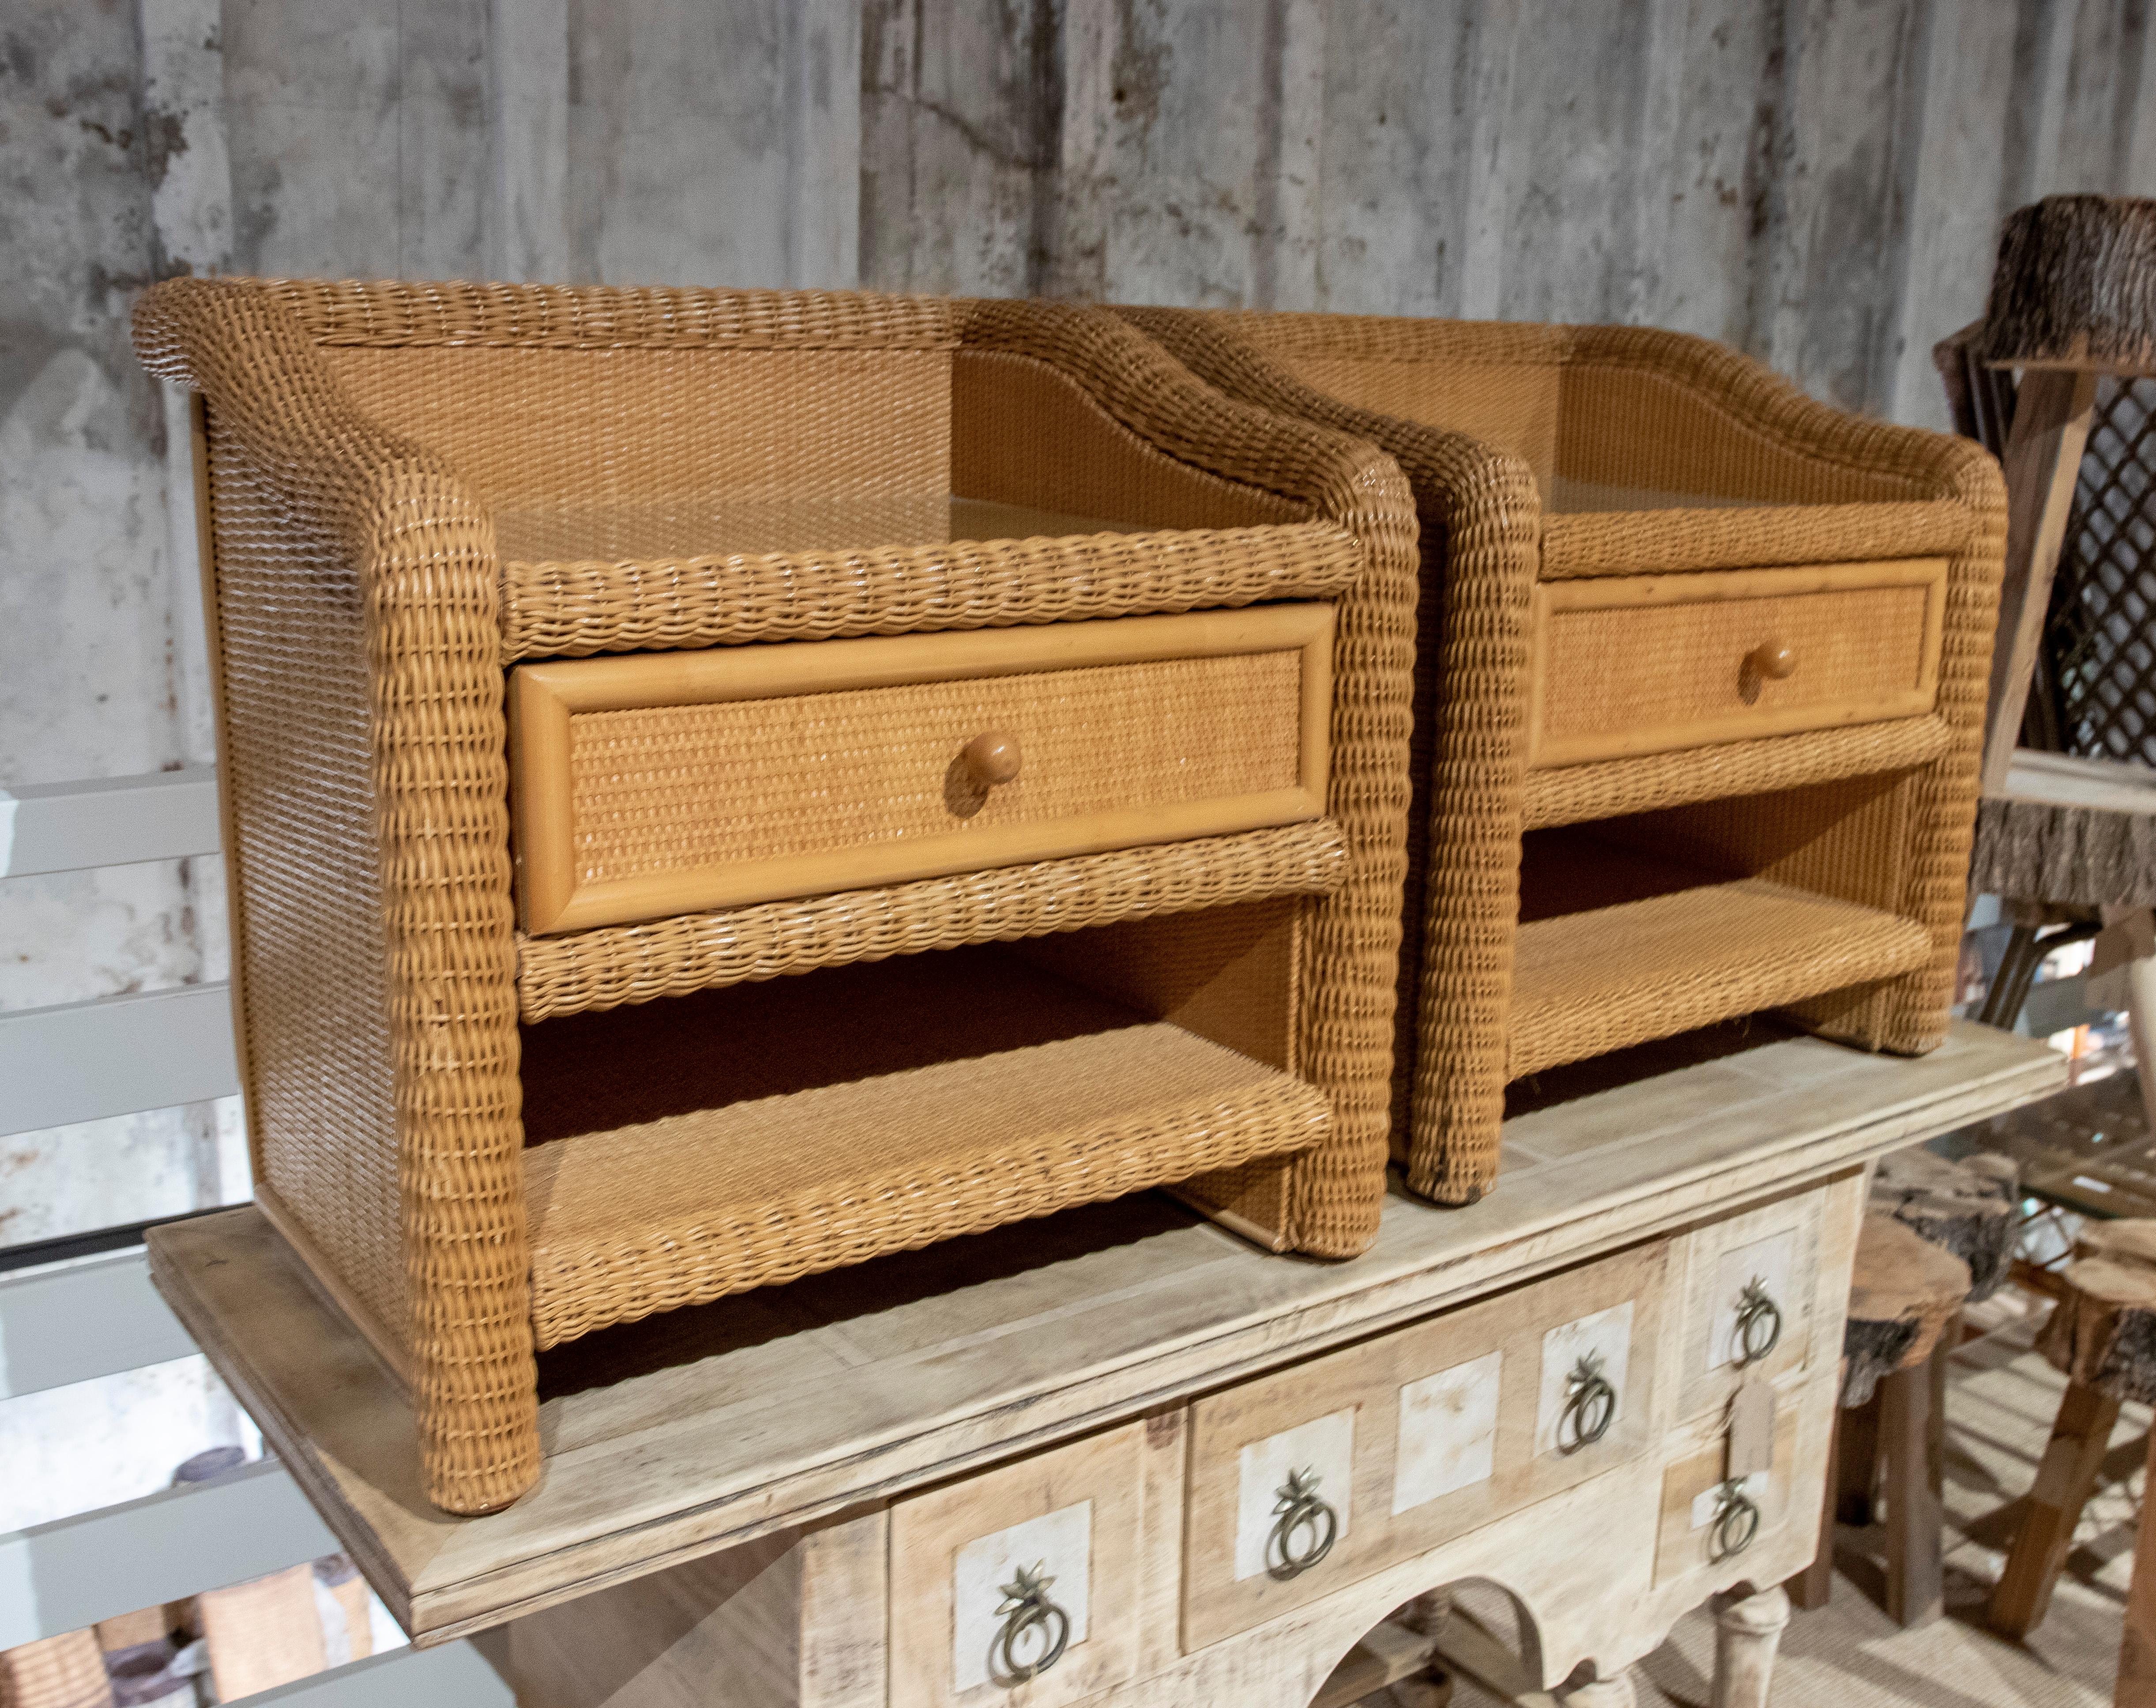 1980s Spanish pair of wicker bedside tables with drawer.